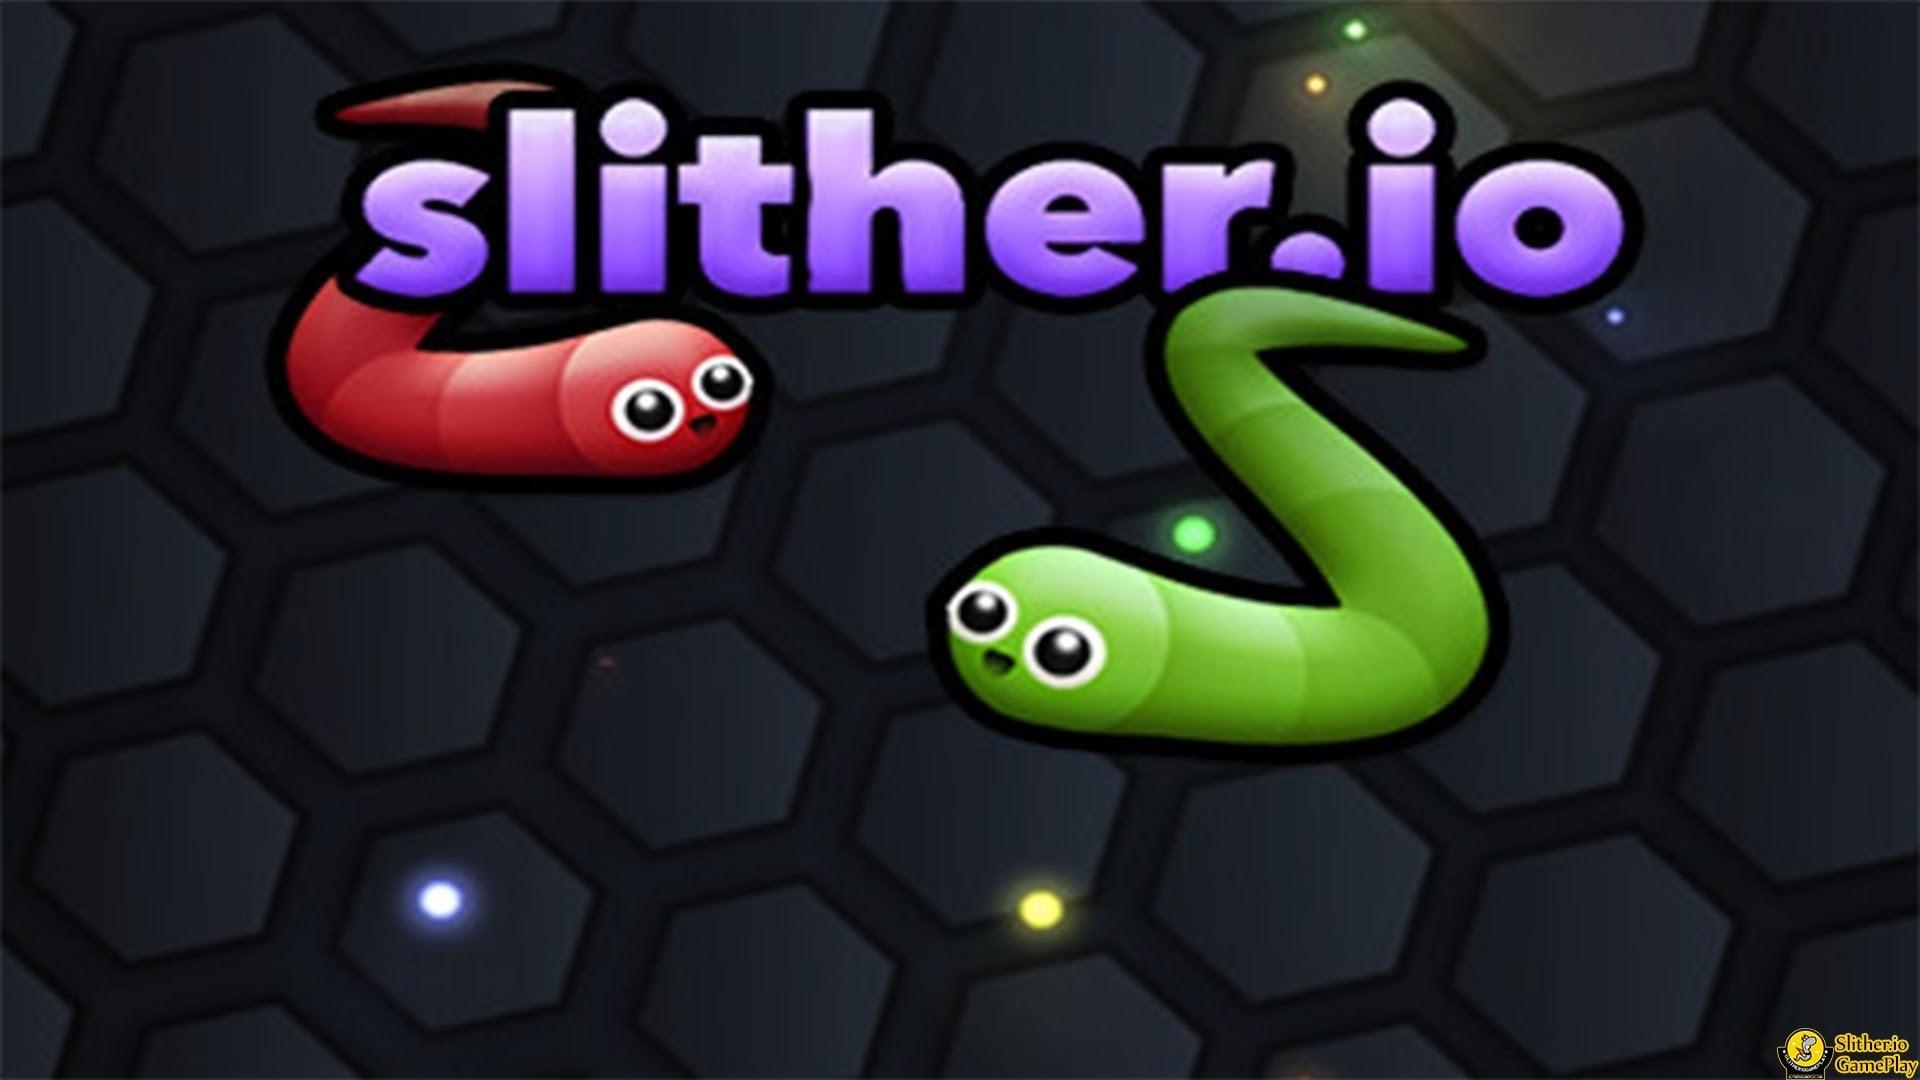 Slither.io Wallpaper.io Hack and Slitherio Mods